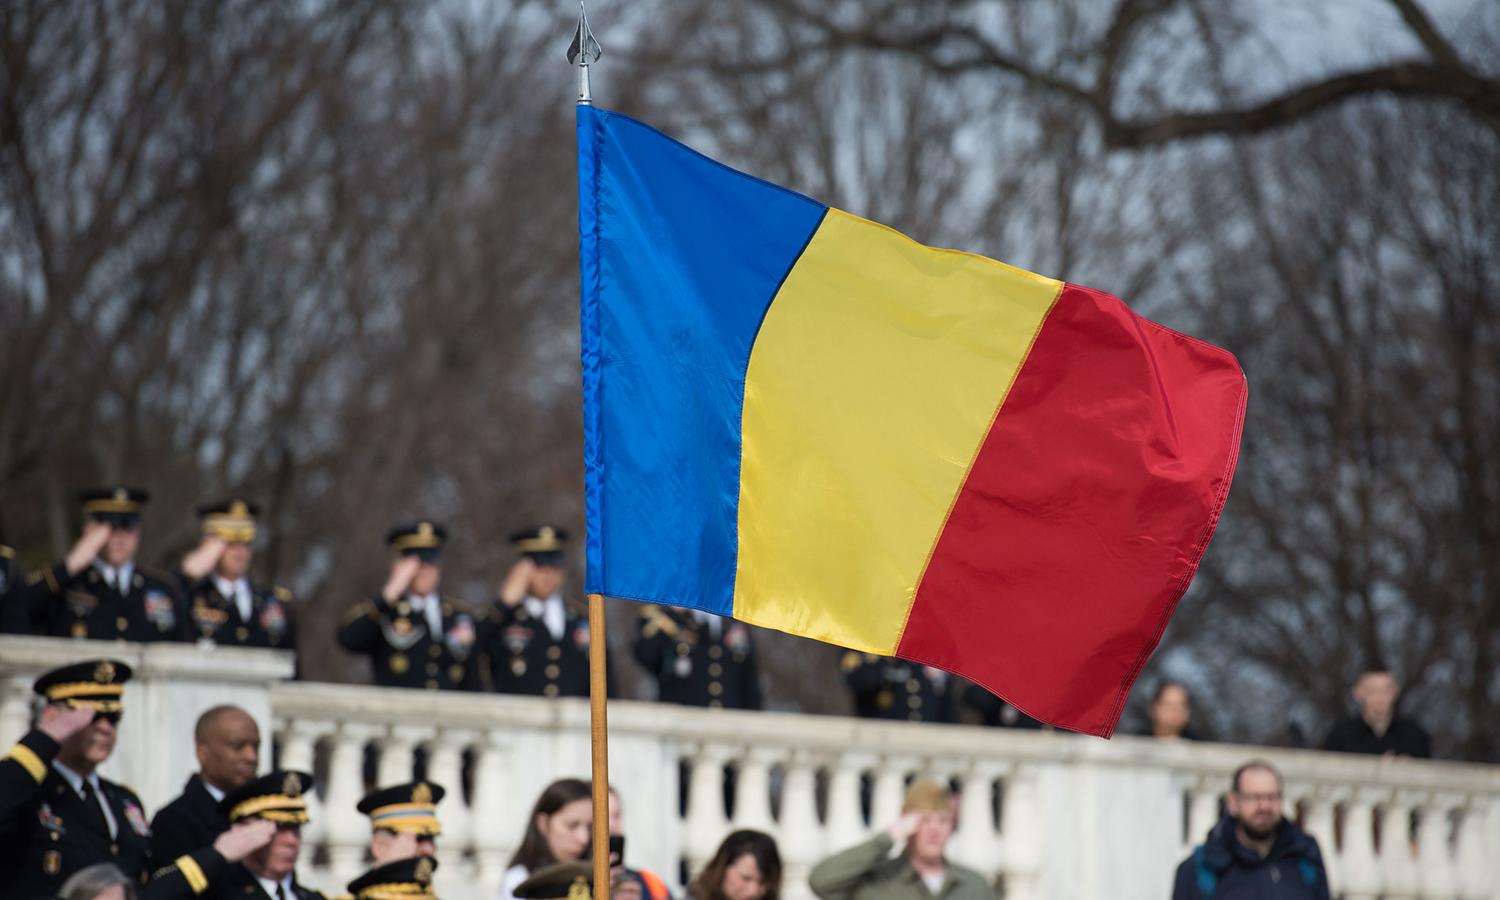 Romanian police announced the arrest of members of the REvil ransomware group on Nov. 8. Pictured: The Romanian flag flies Feb. 7, 2017, during an armed forces ceremony at Fort Meyer, Va., Feb. 7, 2017. (Pfc. Gabriel Silva/US Army)